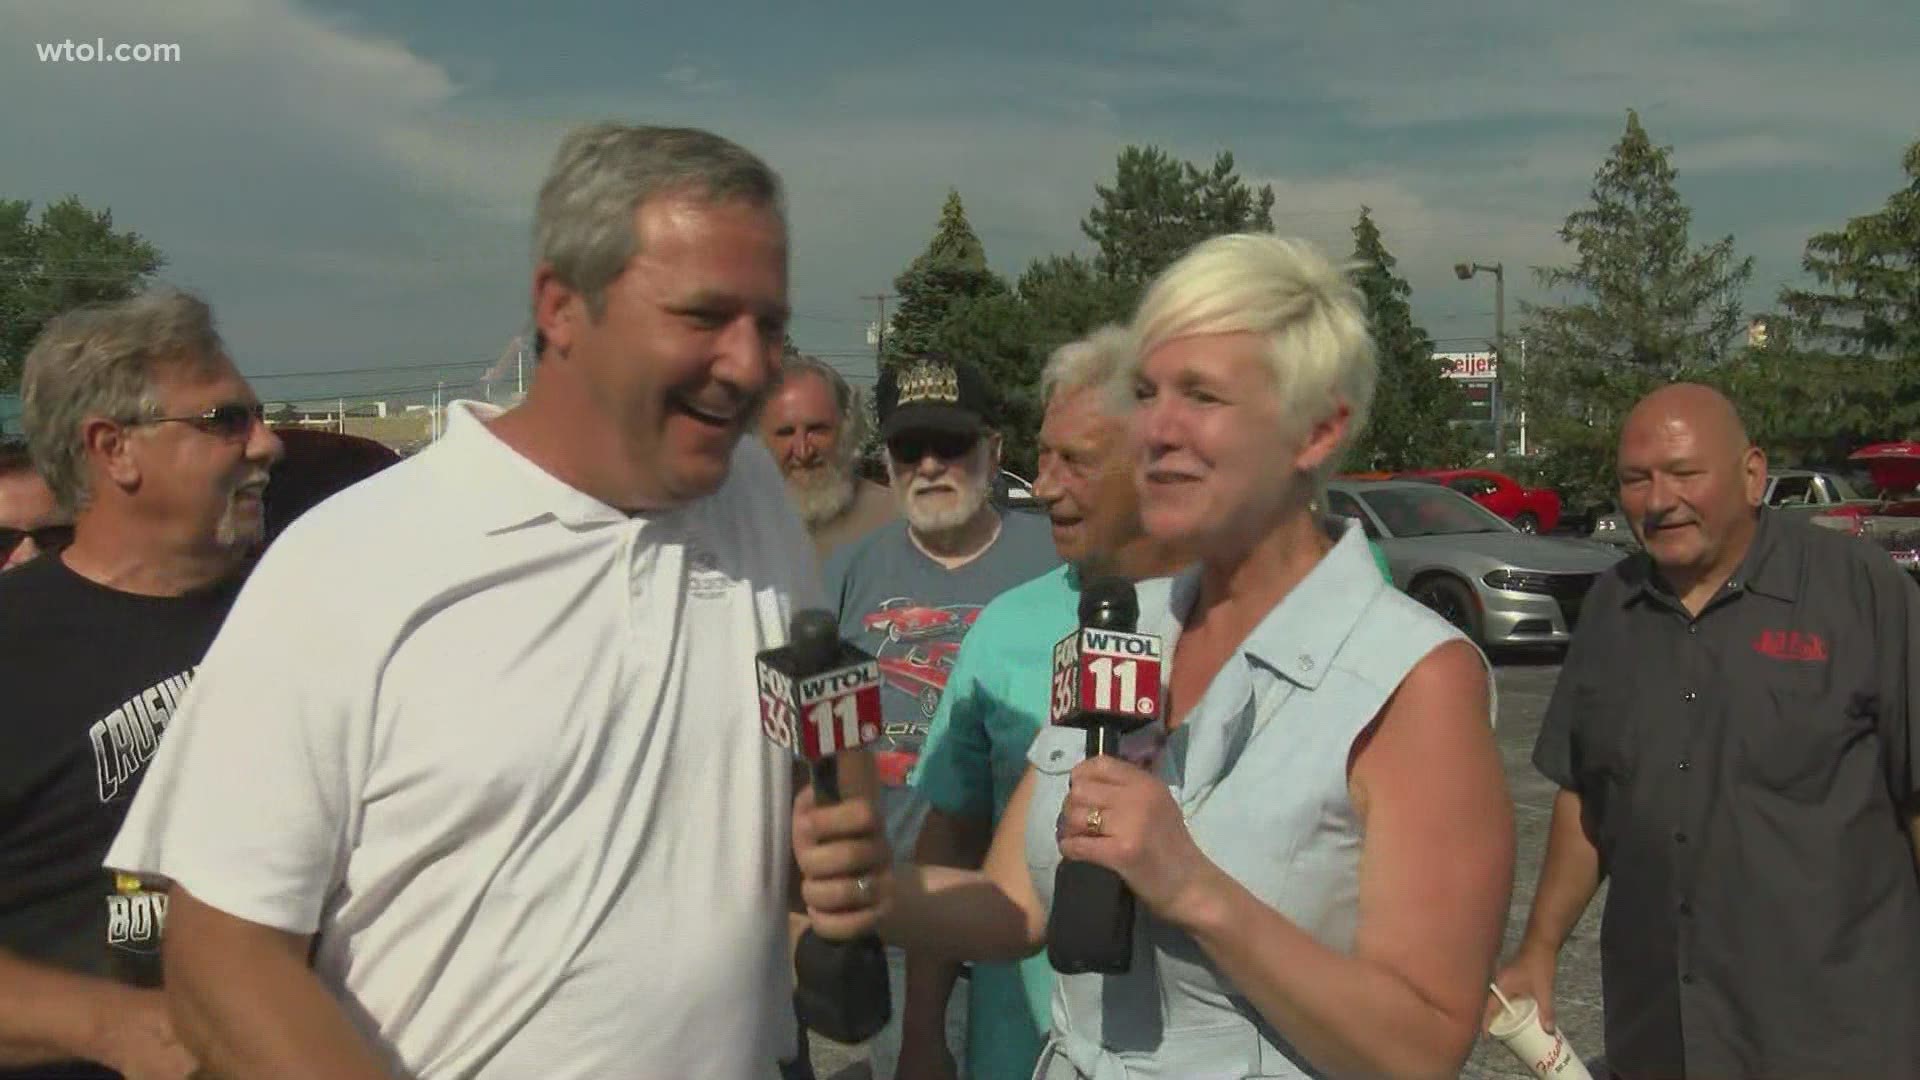 WTOL 11 Chief Meteorologist Robert Shiels is saying goodbye to viewers all week long. And Chrys had to come give him the best during the cruise-in at Frisch's!